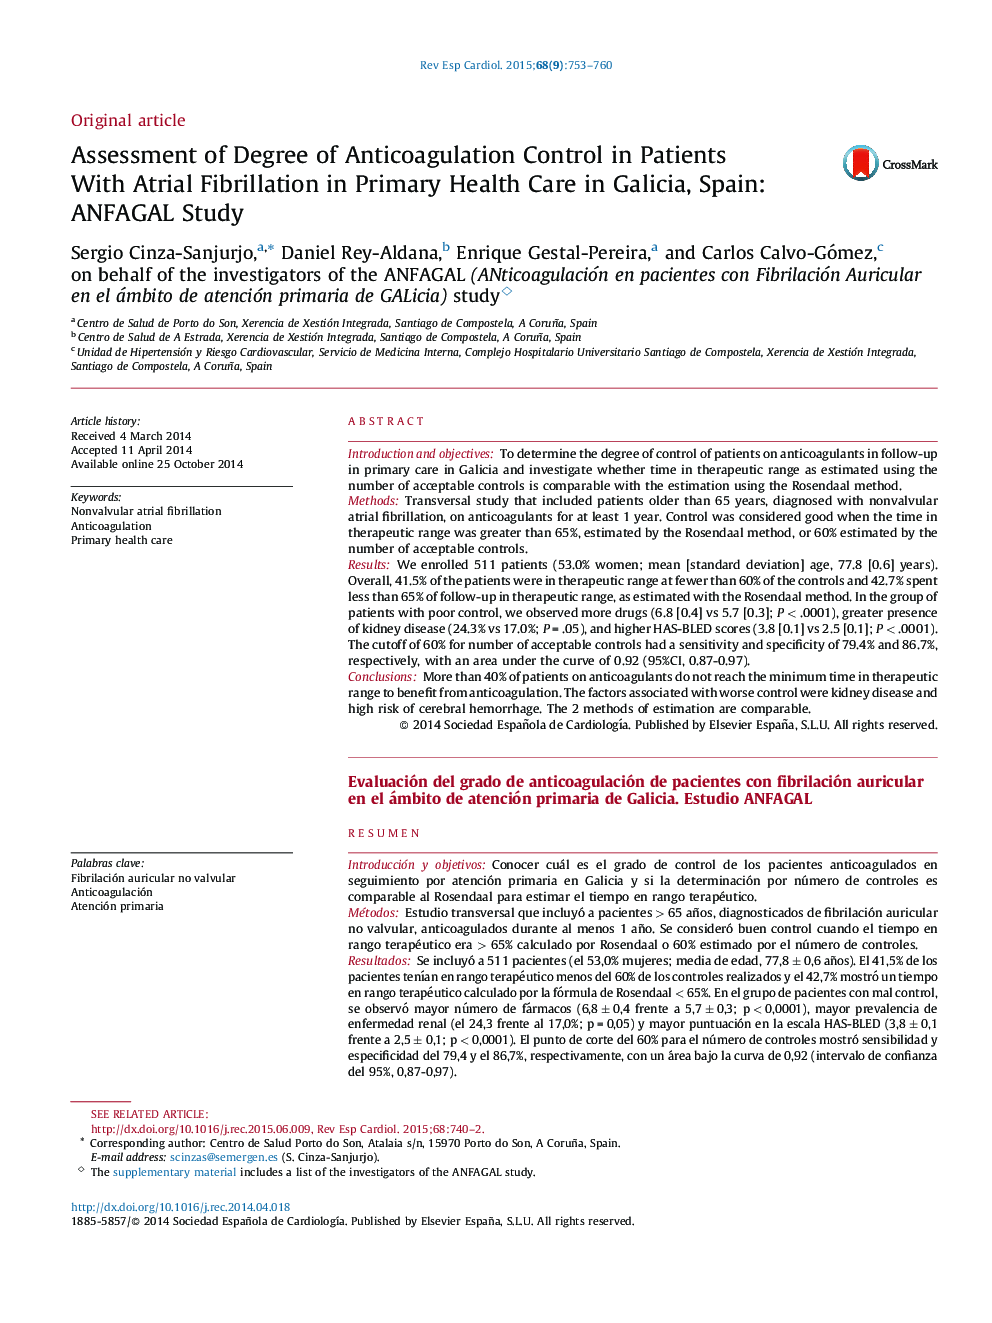 Assessment of Degree of Anticoagulation Control in Patients With Atrial Fibrillation in Primary Health Care in Galicia, Spain: ANFAGAL Study